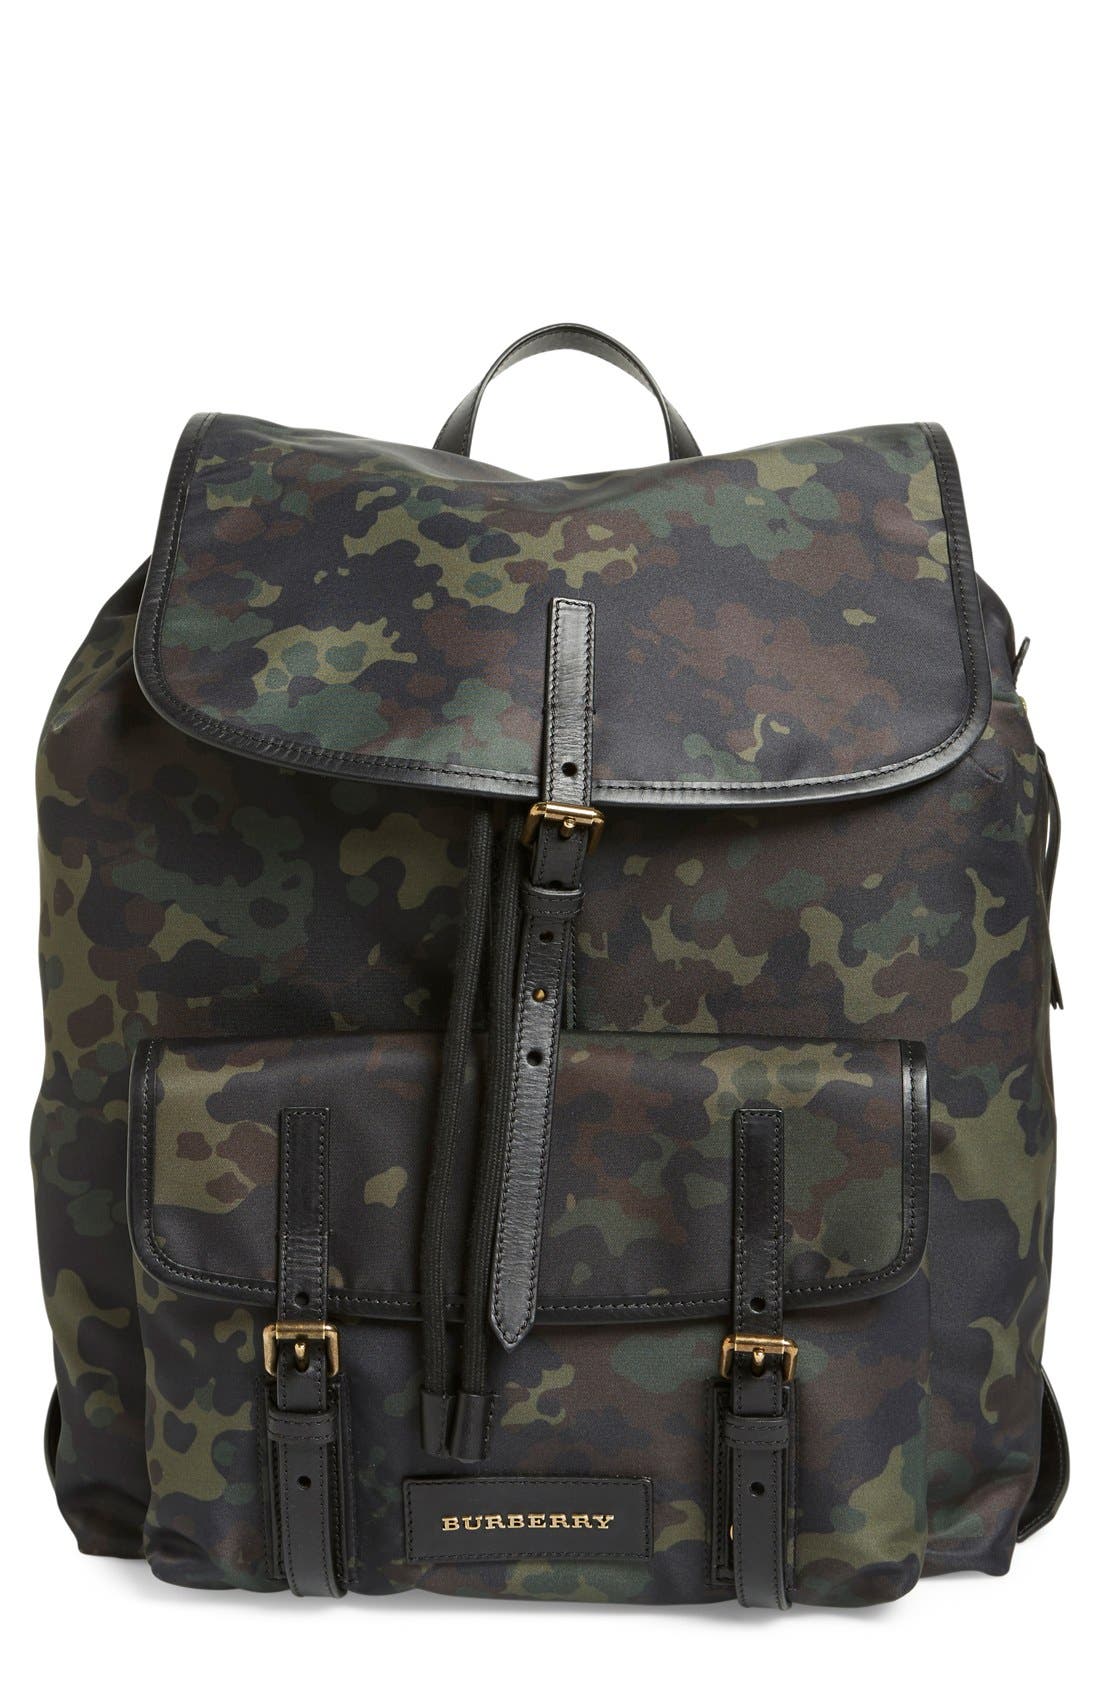 burberry camouflage bag